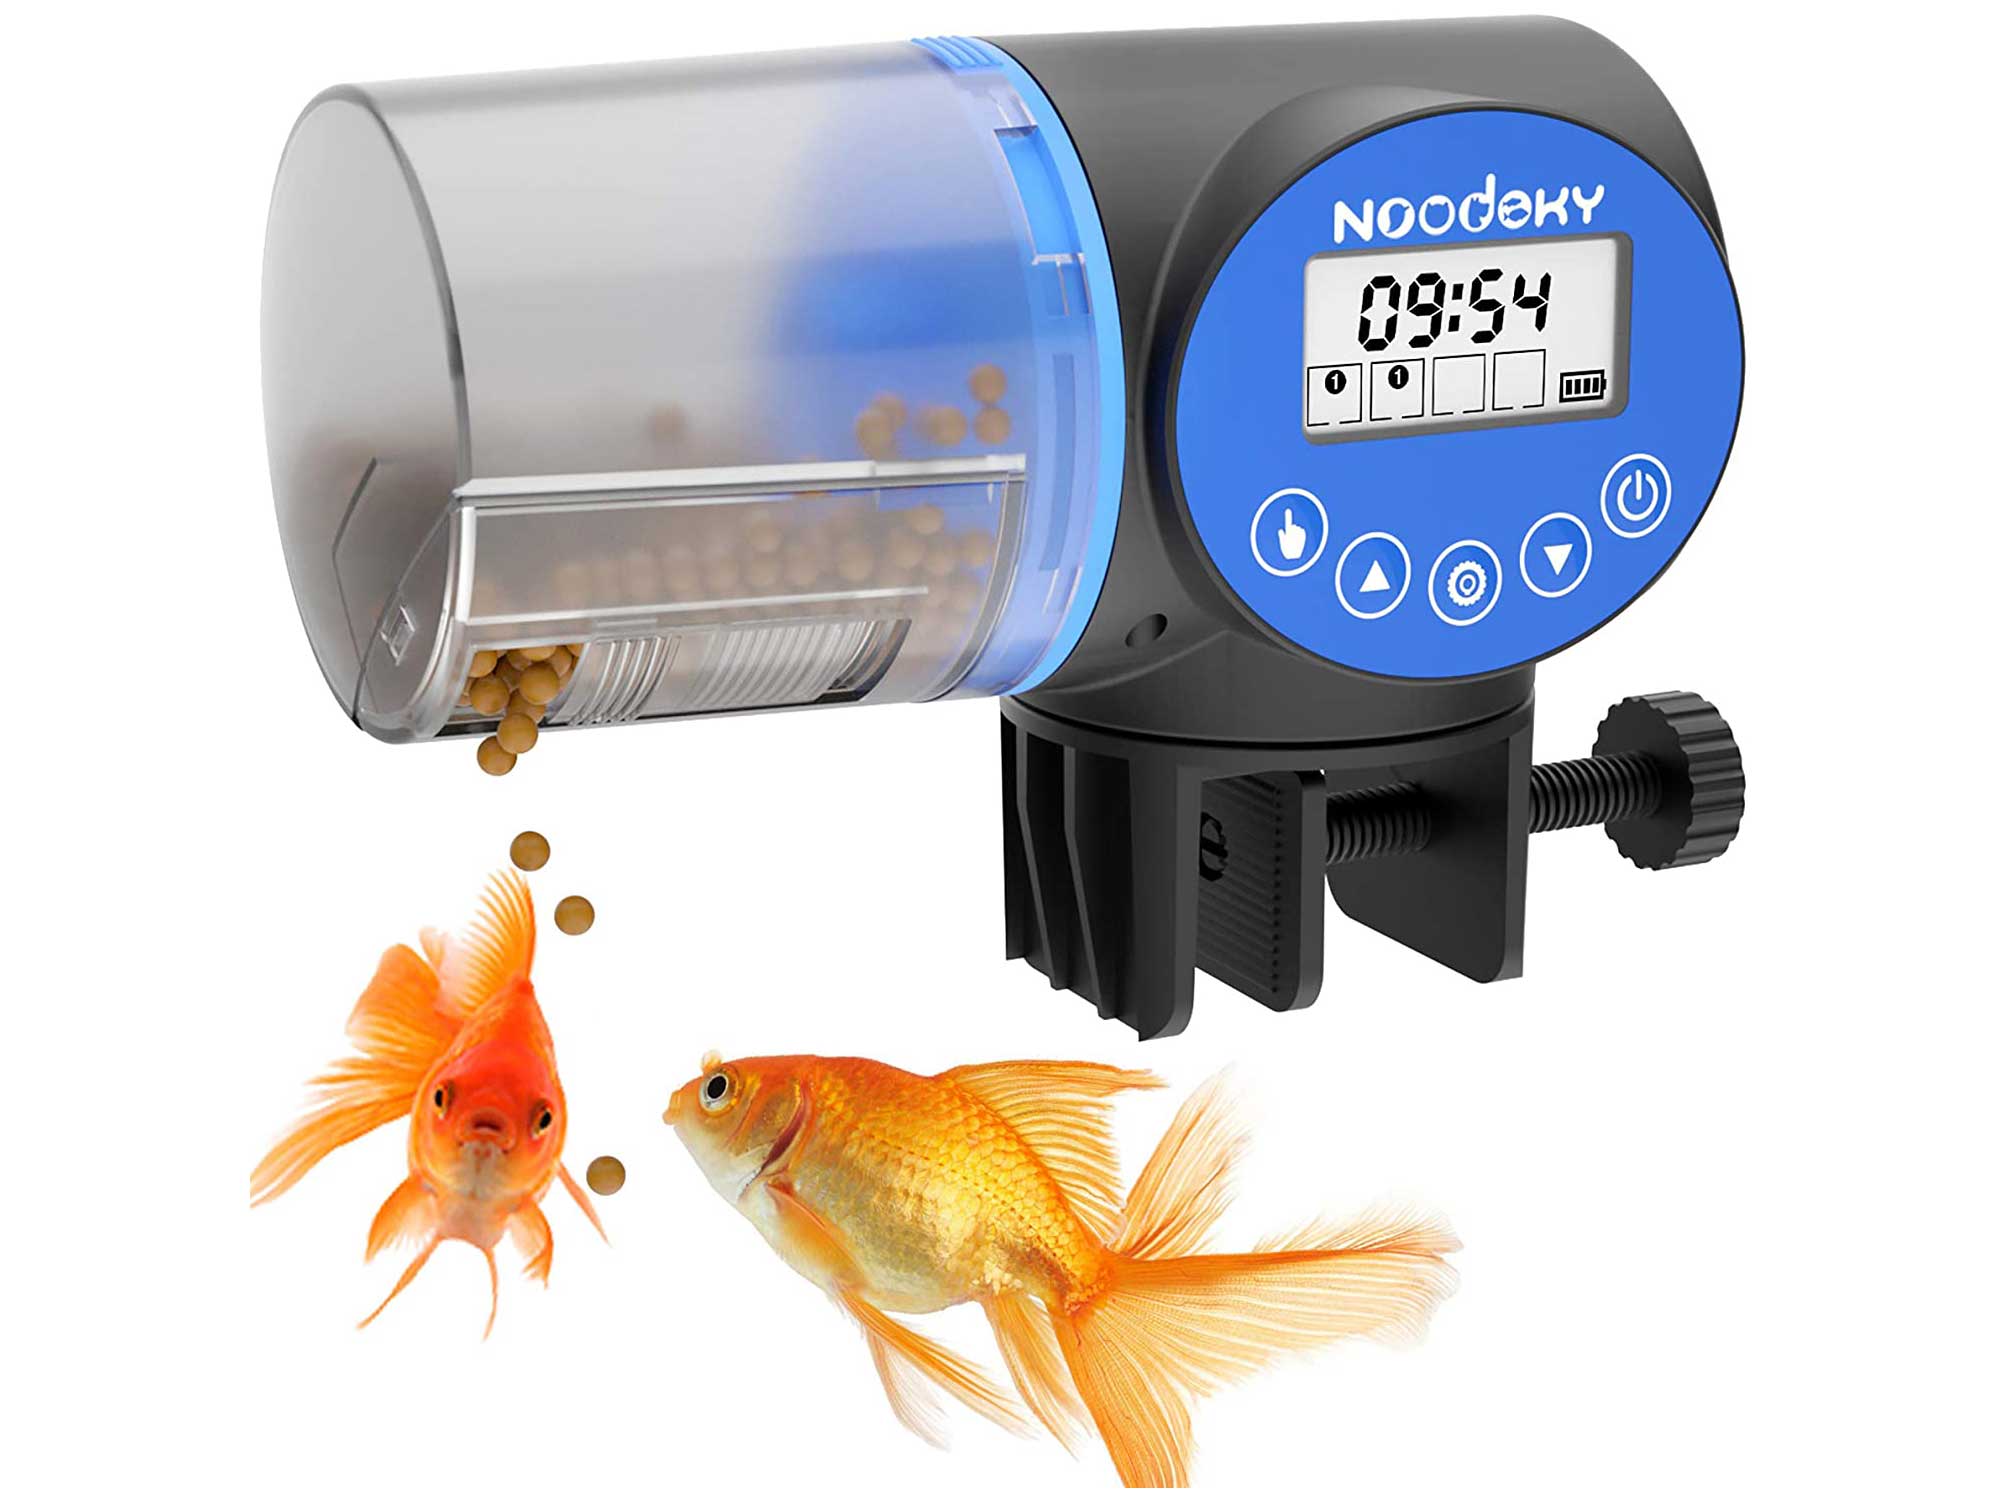 Noodoky Automatic Fish Feeder, Moisture-Proof Electric Auto Fish Food Feeder Timer Dispenser for Aquarium or Small Fish Turtle Tank, Auto Feeding on Vacation or Holidays